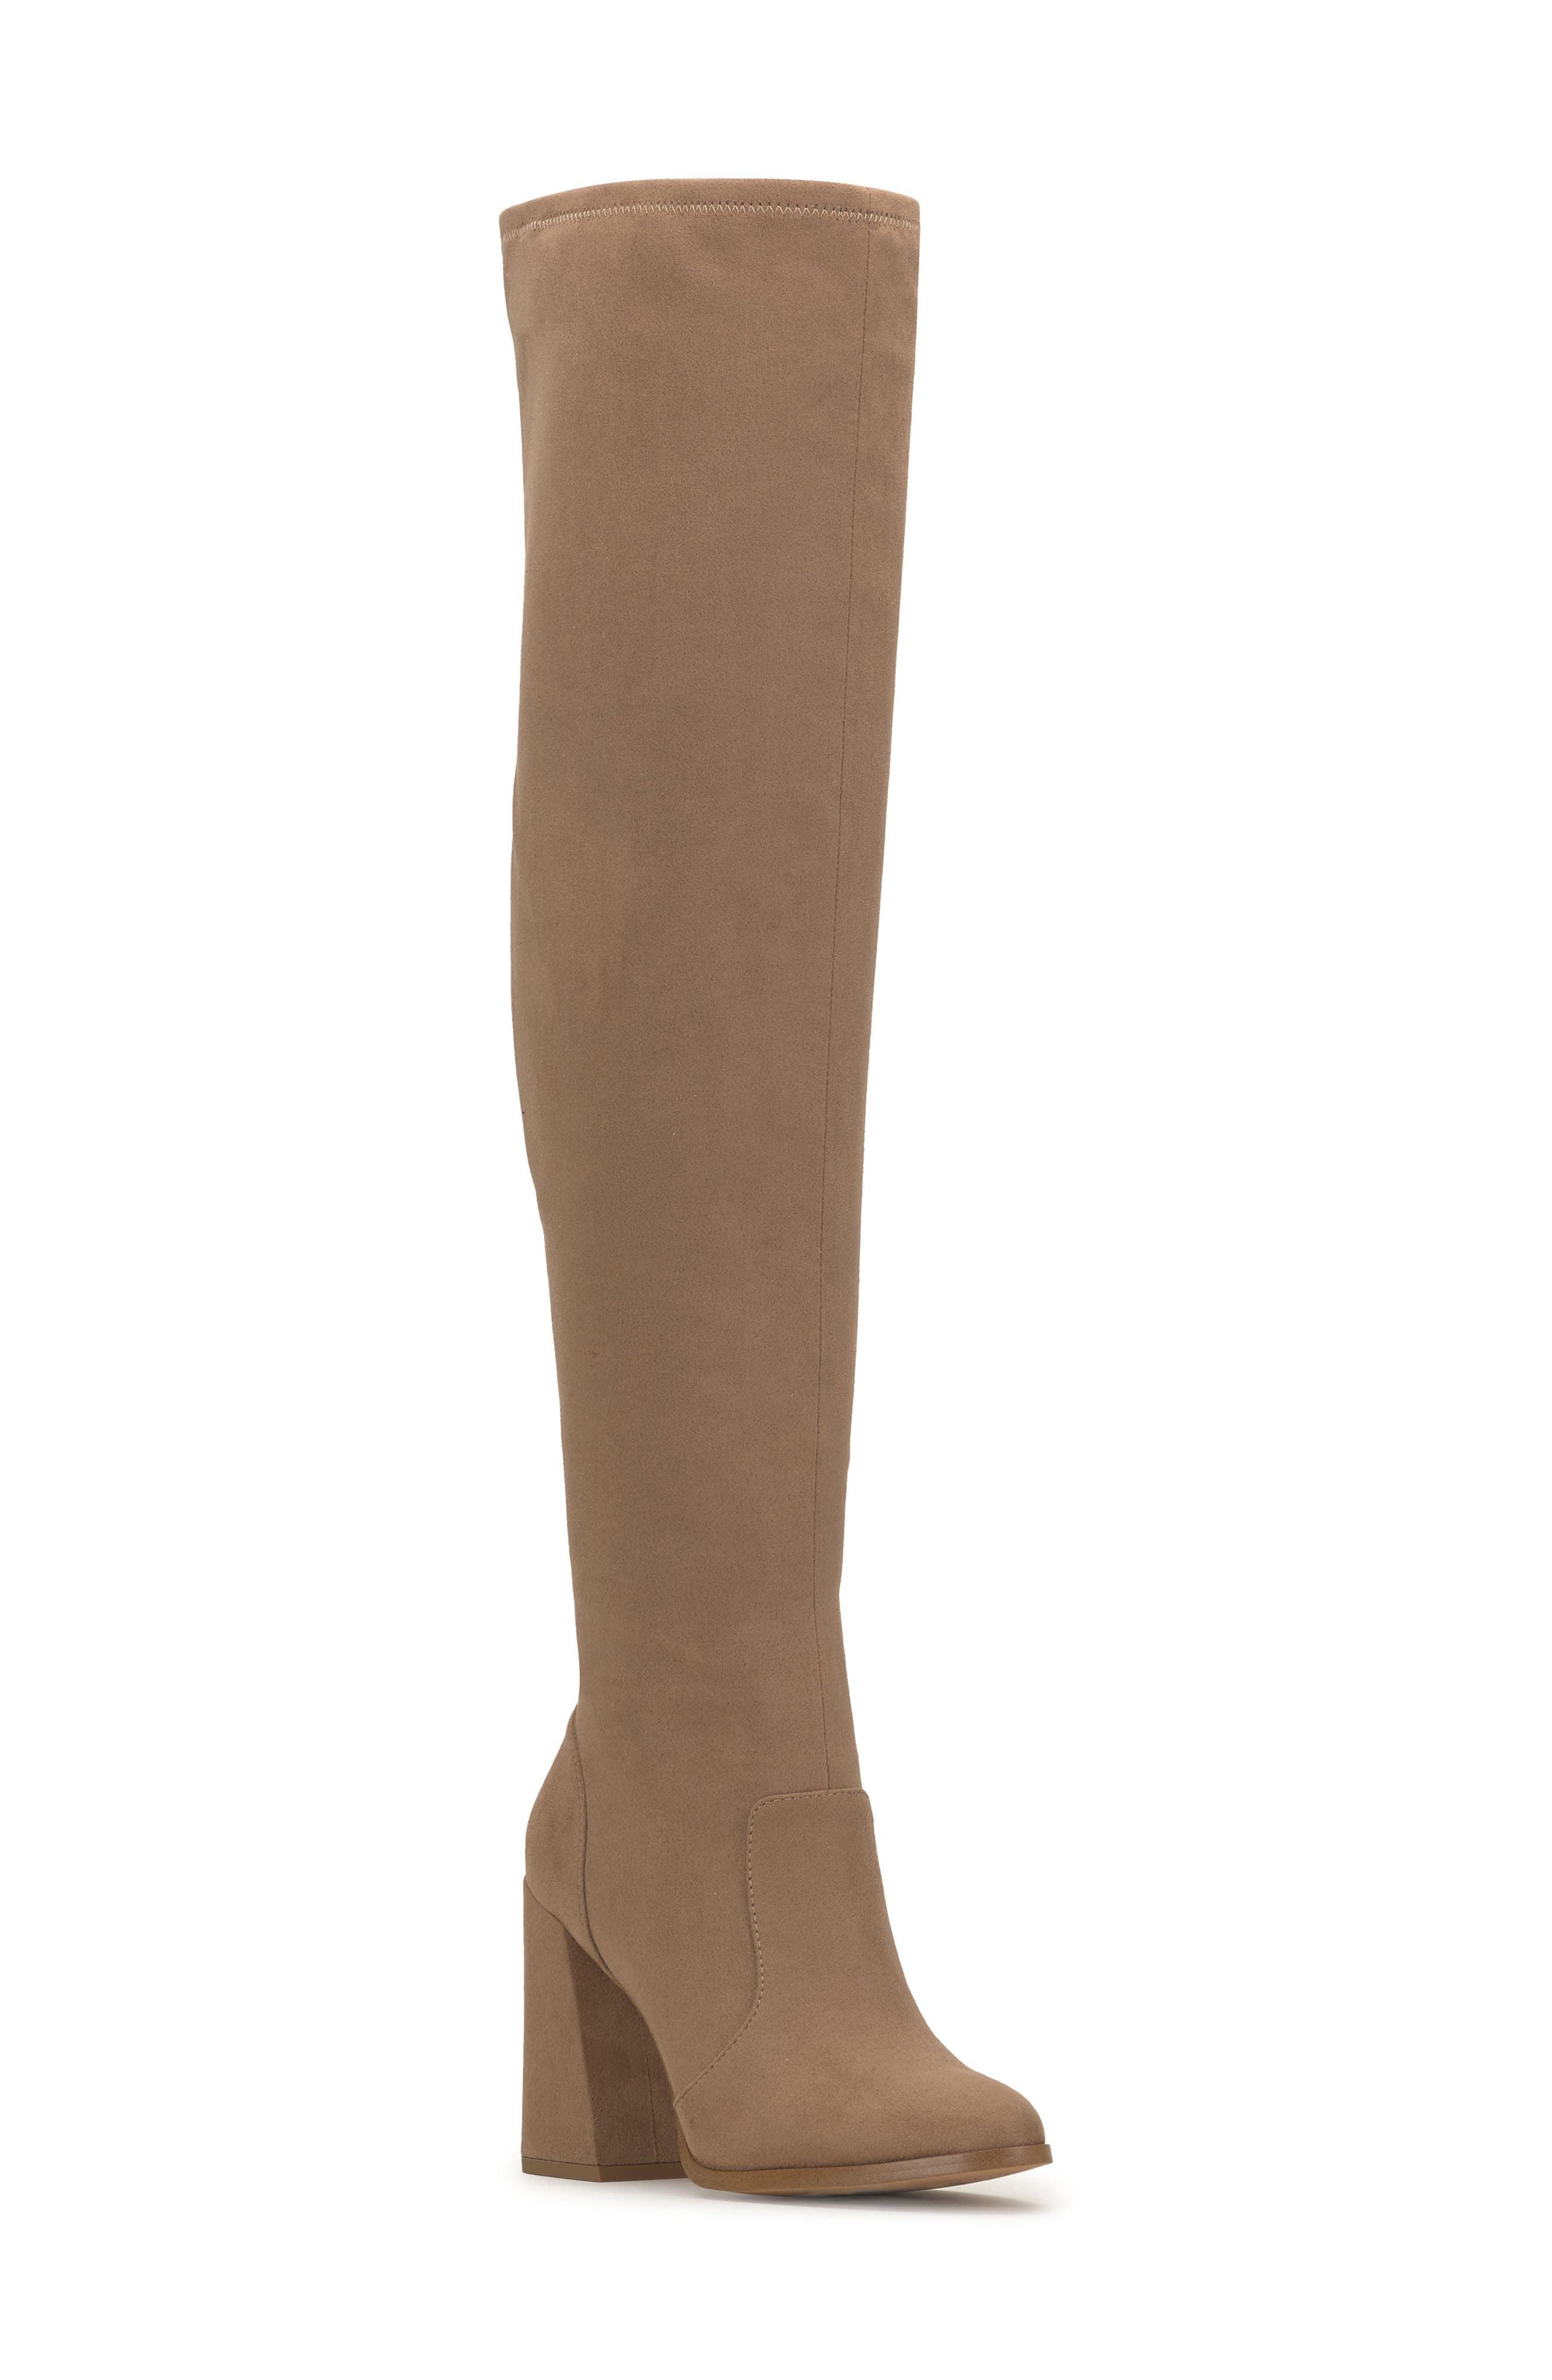 The Jessica Faux Leather Knee High Cowboy Boot in Cream 8.5 / Cream